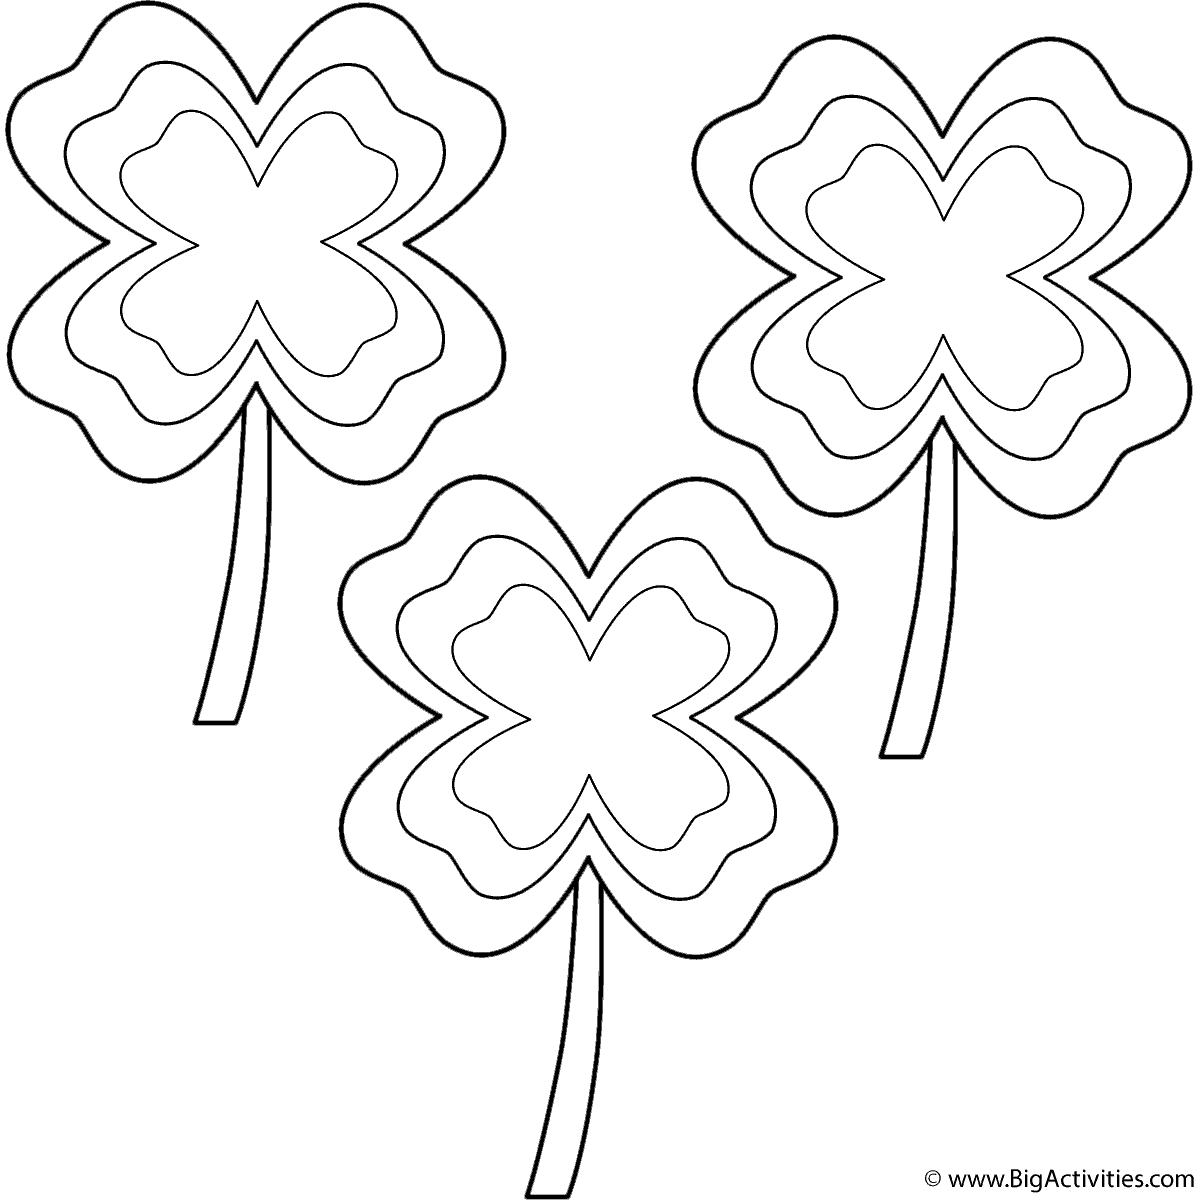 Four leaf clovers with multi